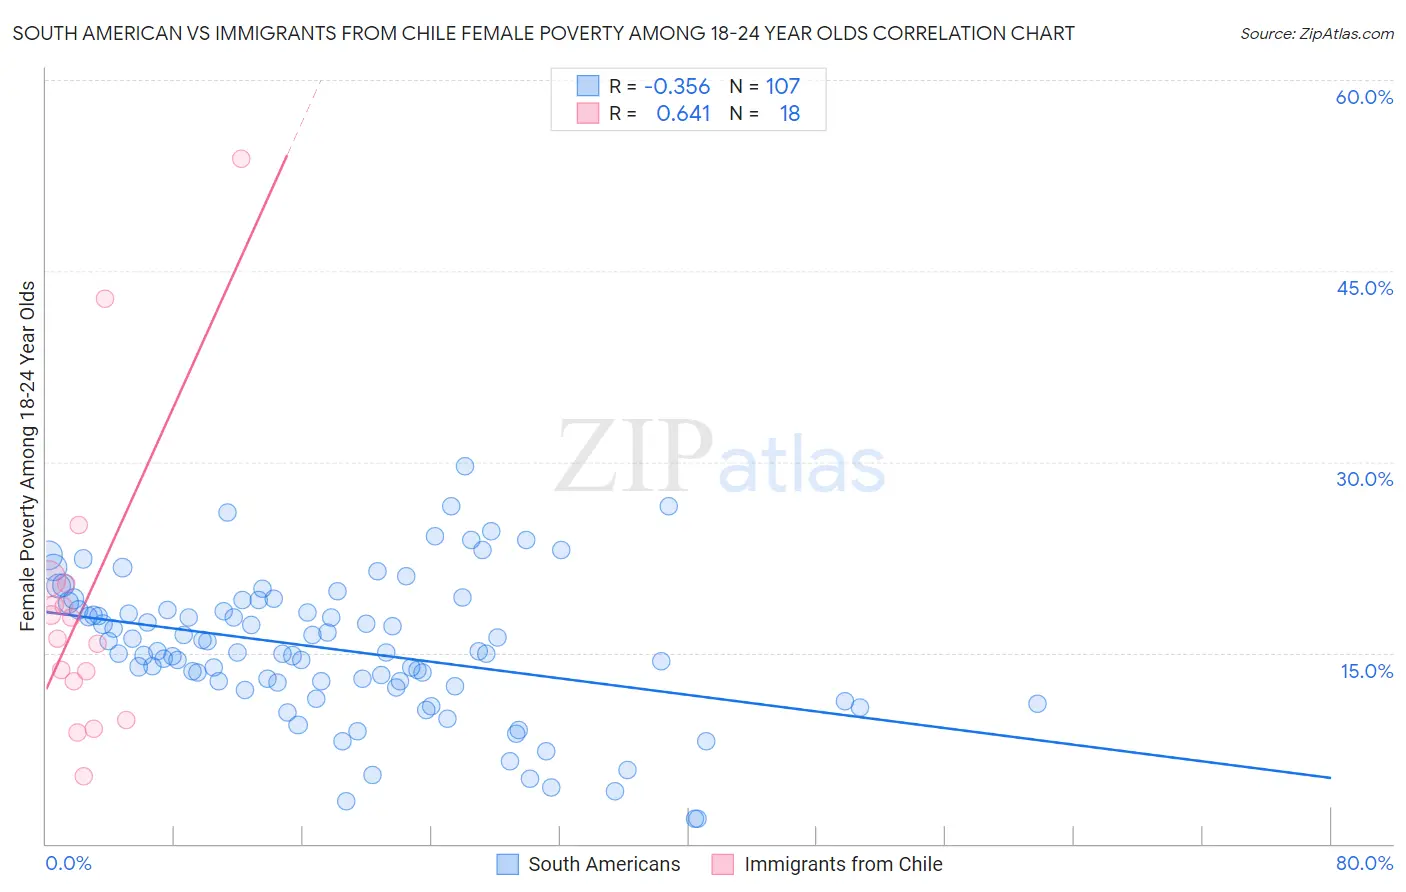 South American vs Immigrants from Chile Female Poverty Among 18-24 Year Olds